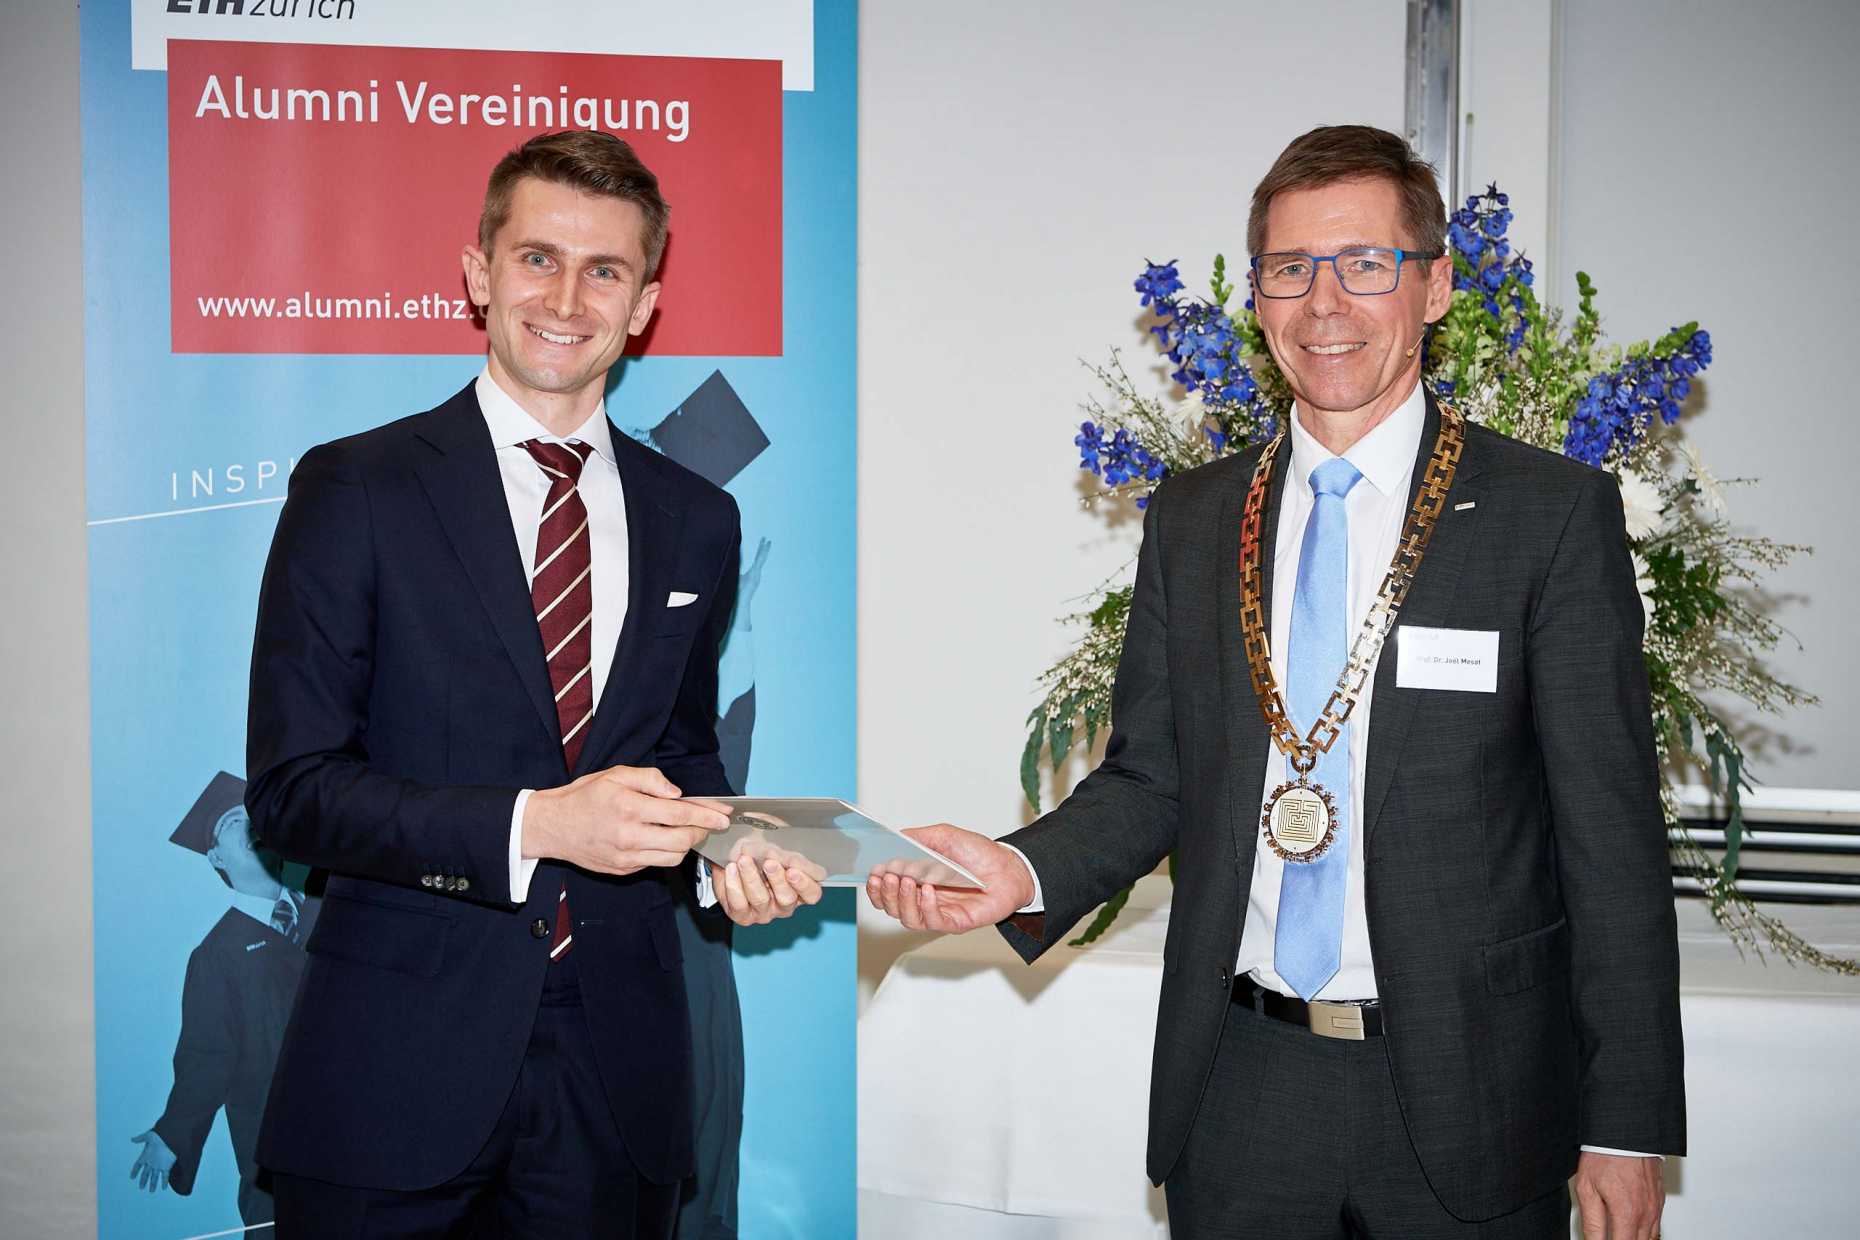 Enlarged view: Florian Haufe receives the ETH Medal from Joël Mesot for his outstanding doctoral thesis at the award ceremony